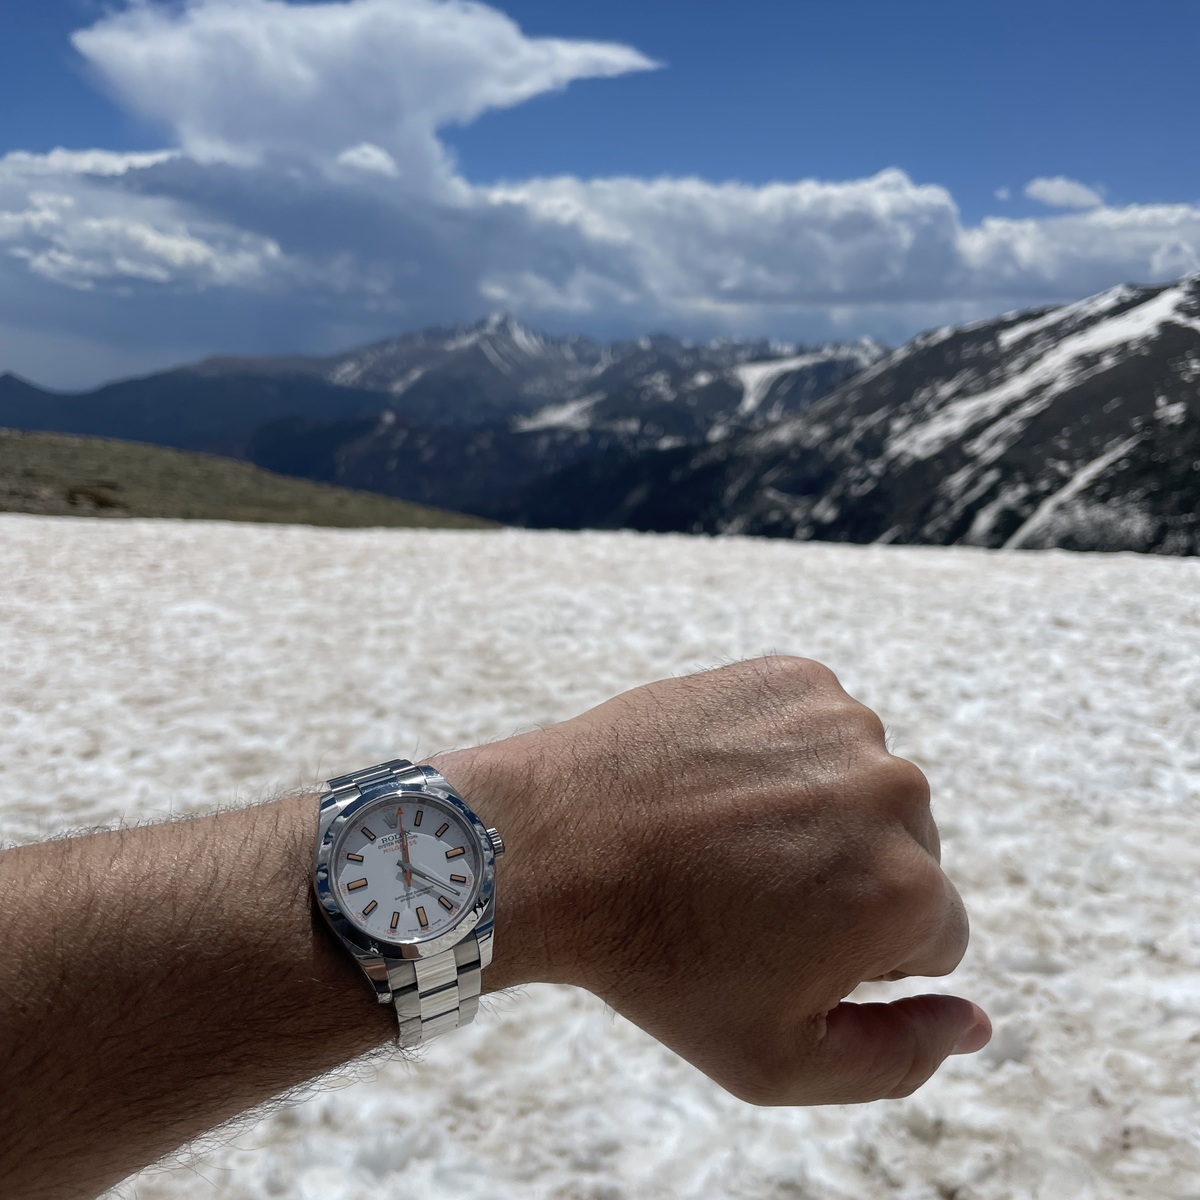 Rolex Milgauss White With Snow and Mountains